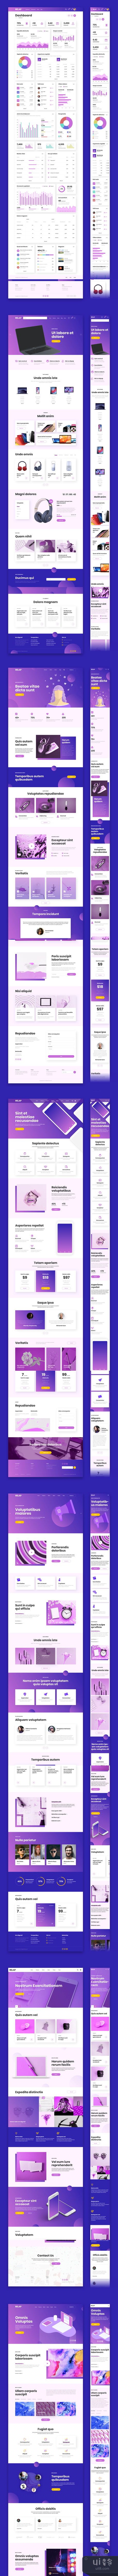 RELAP - 响应式登陆页面 (RELAP – Responsive Landing Pages)插图